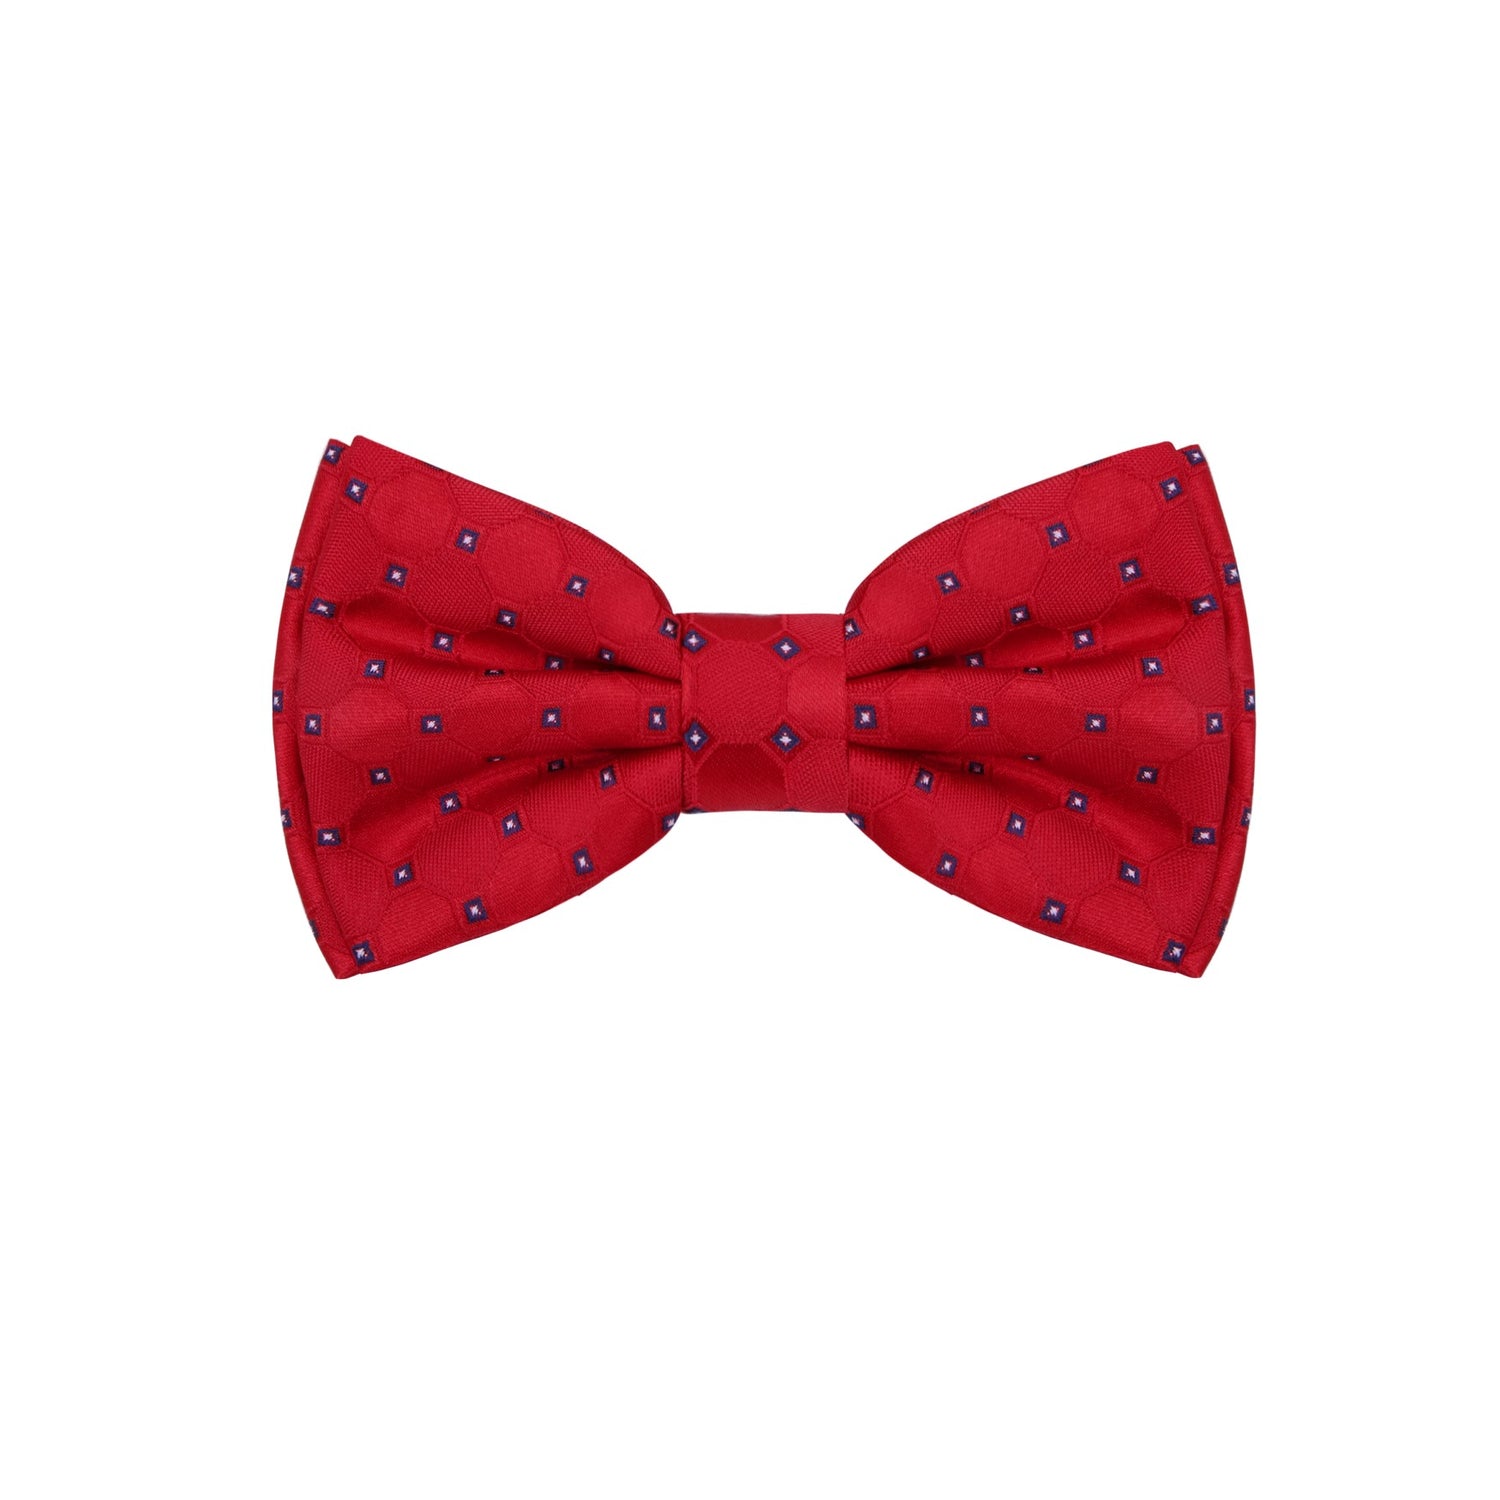 A Red, Black, White Color With Geometric and Small Check Pattern Silk Kids Pre-Tied Bow Tie 